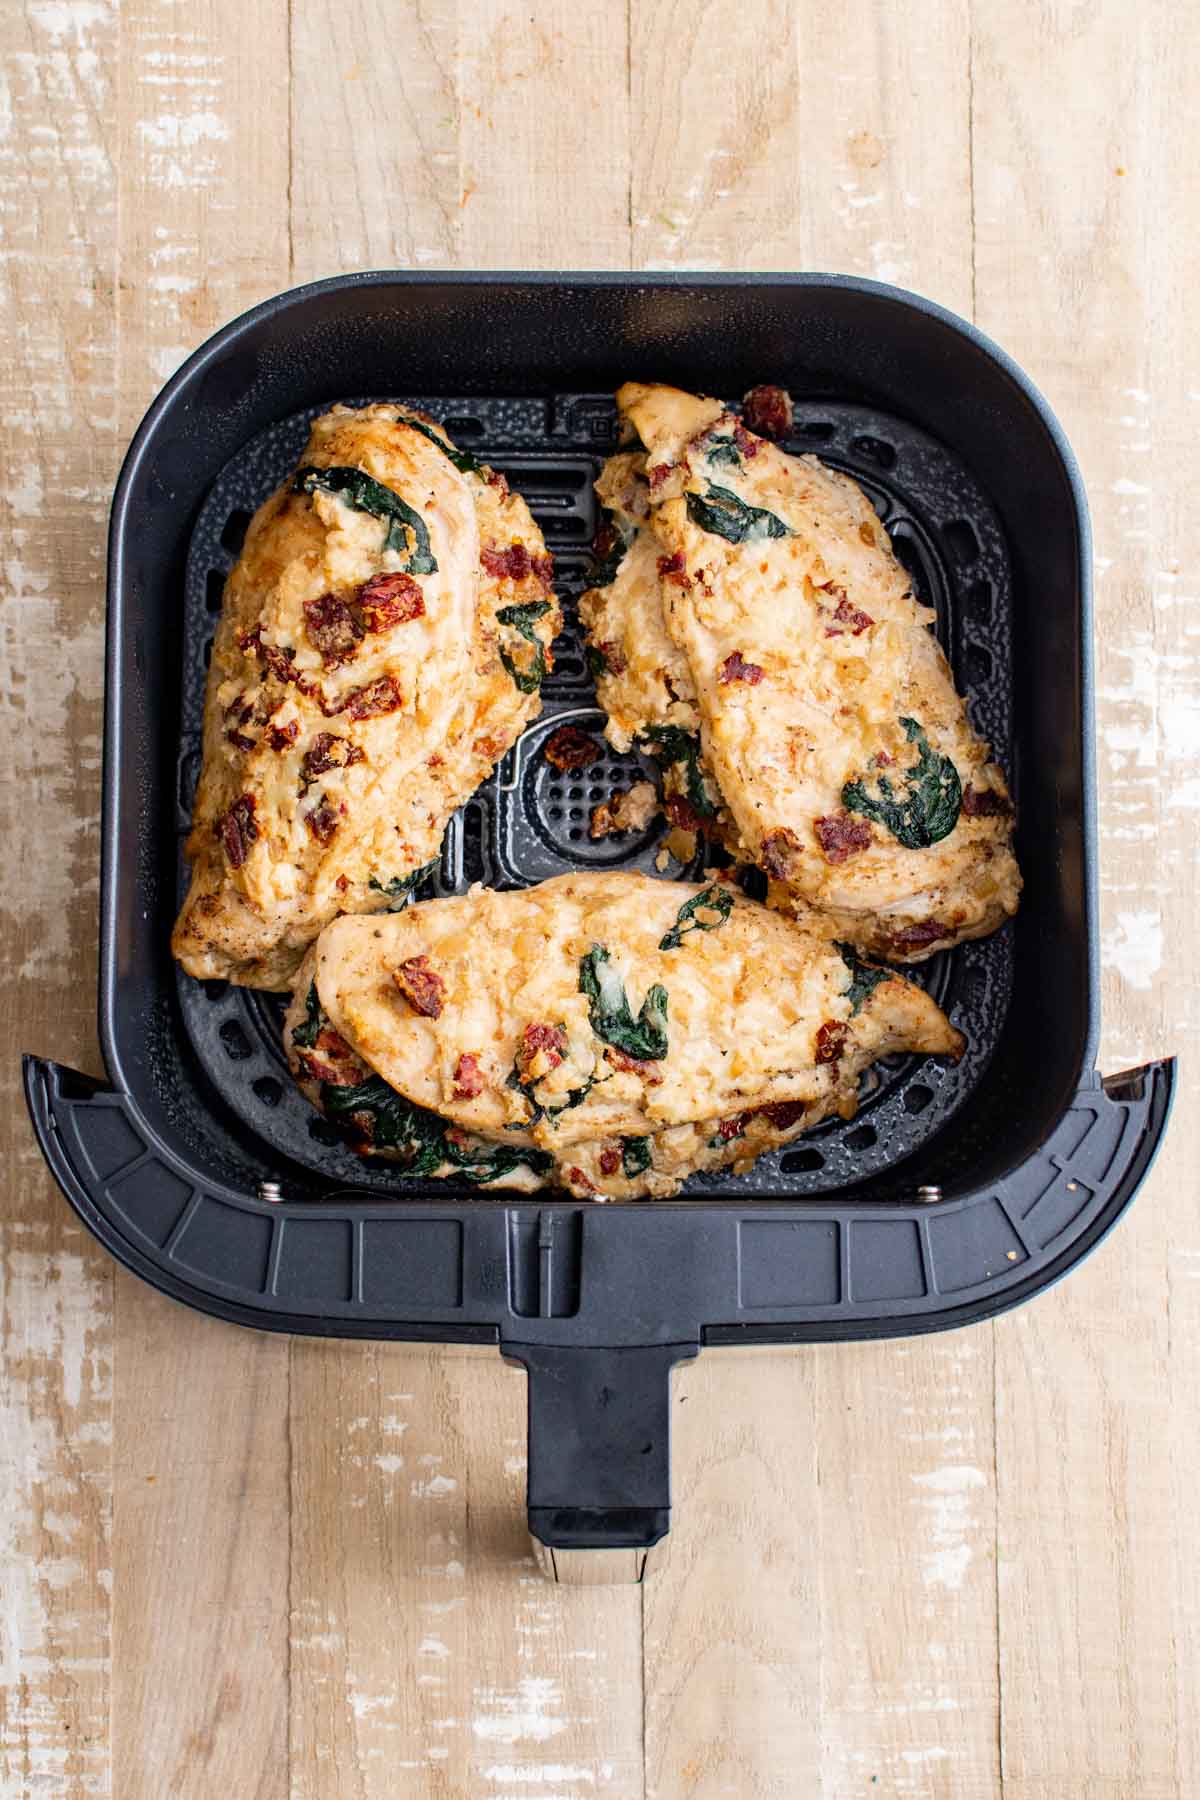 top down view of the cooked air fryer stuffed chicken breast inside the air fryer basket